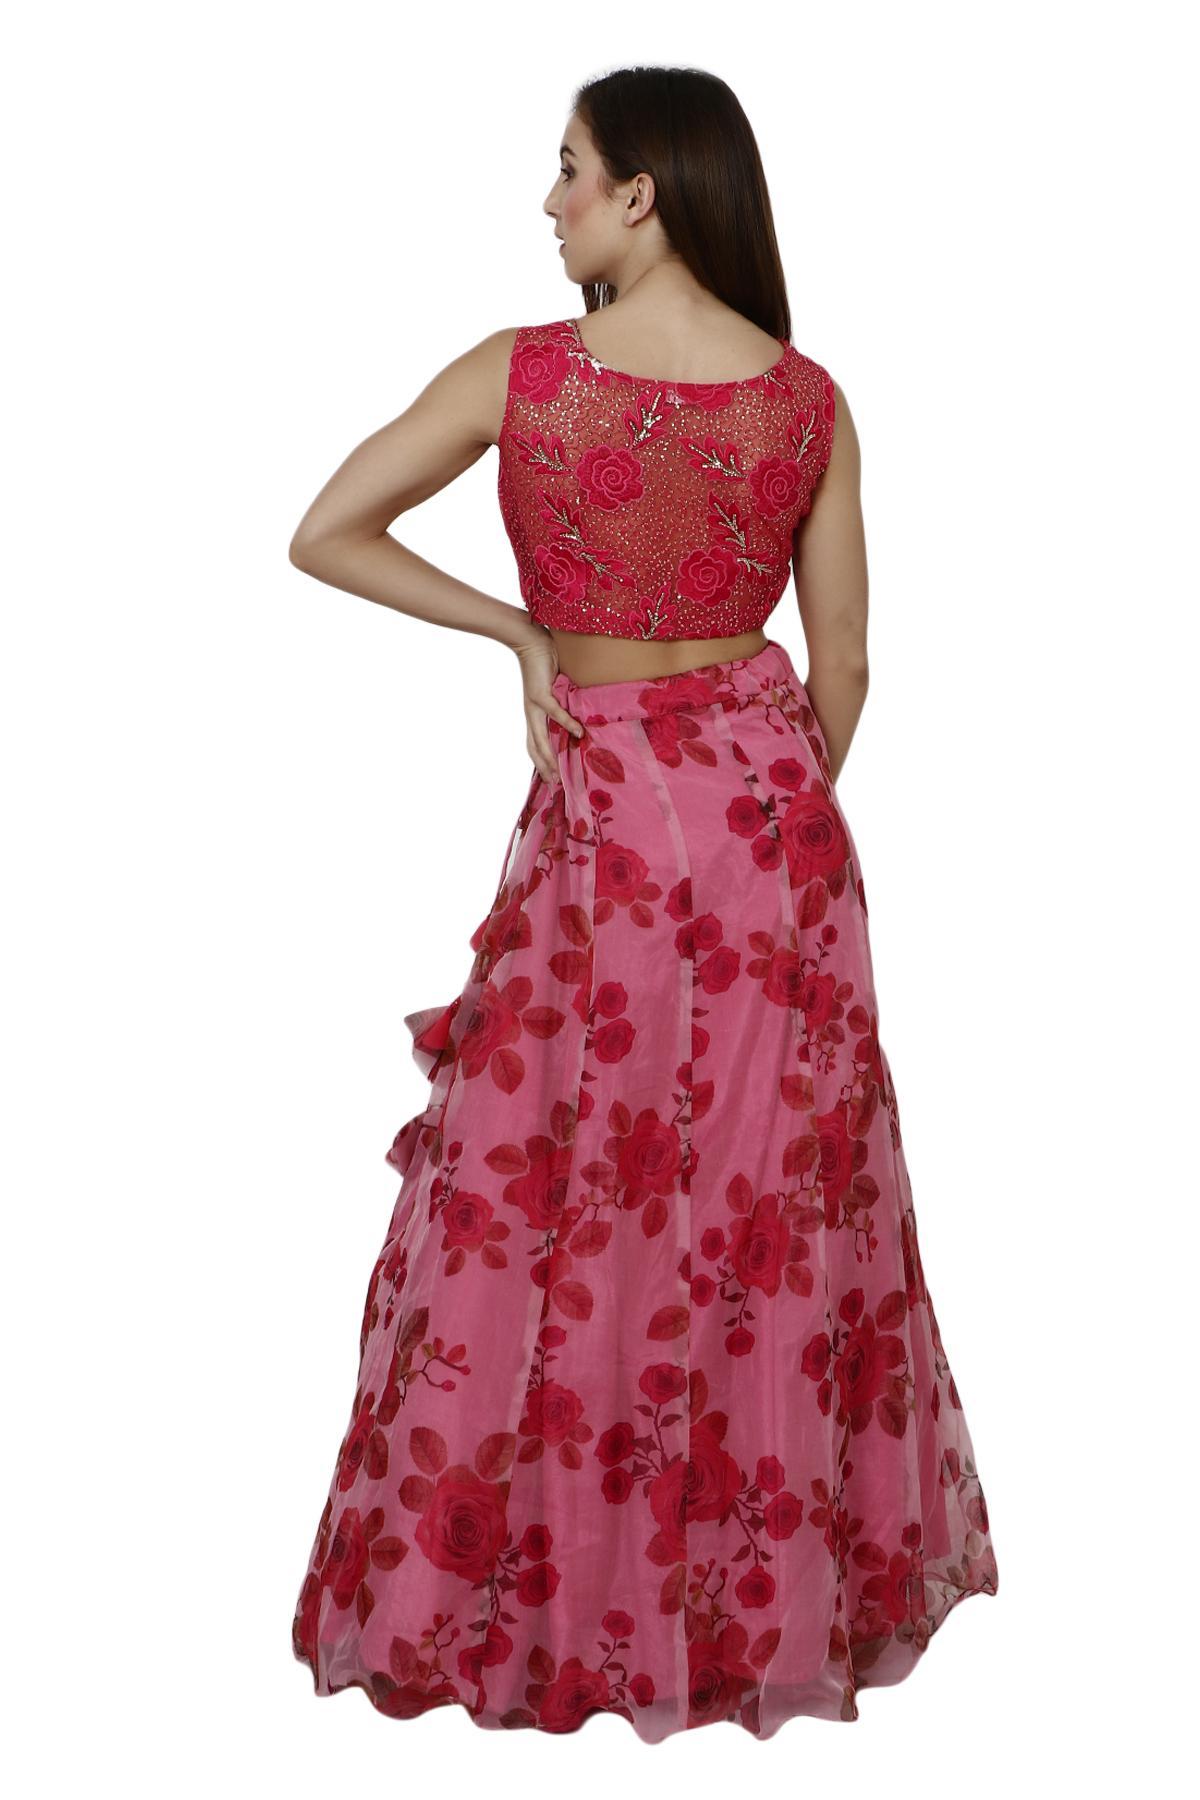 Shades of Pink Pink Floral Crop Top & Skirt by Aaina by aditi for rent  online